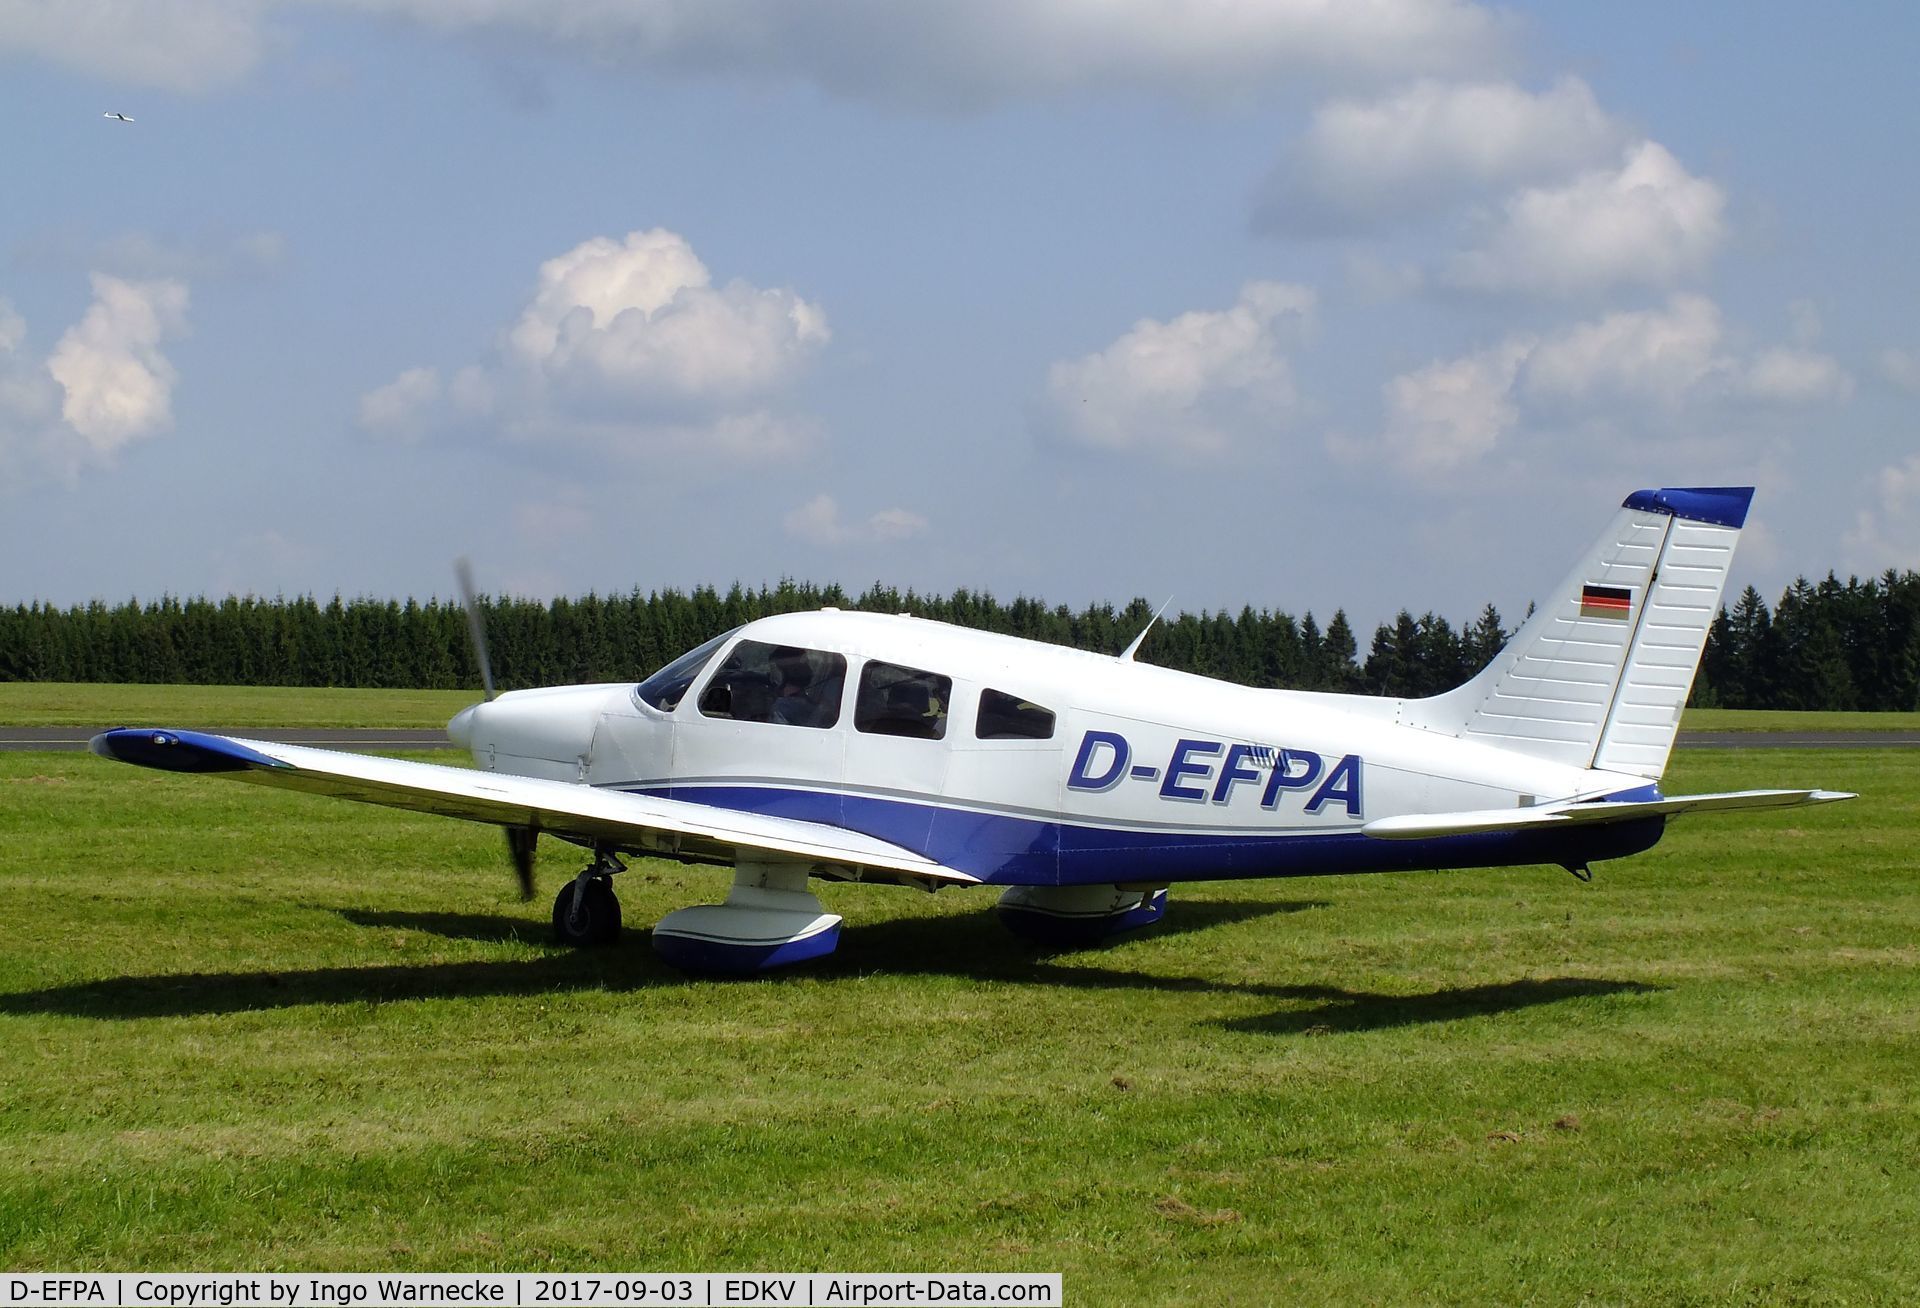 D-EFPA, 1978 Piper PA-28-181 C/N 28-90077, Piper PA-28-181 Archer II at the Dahlemer Binz 60th jubilee airfield display